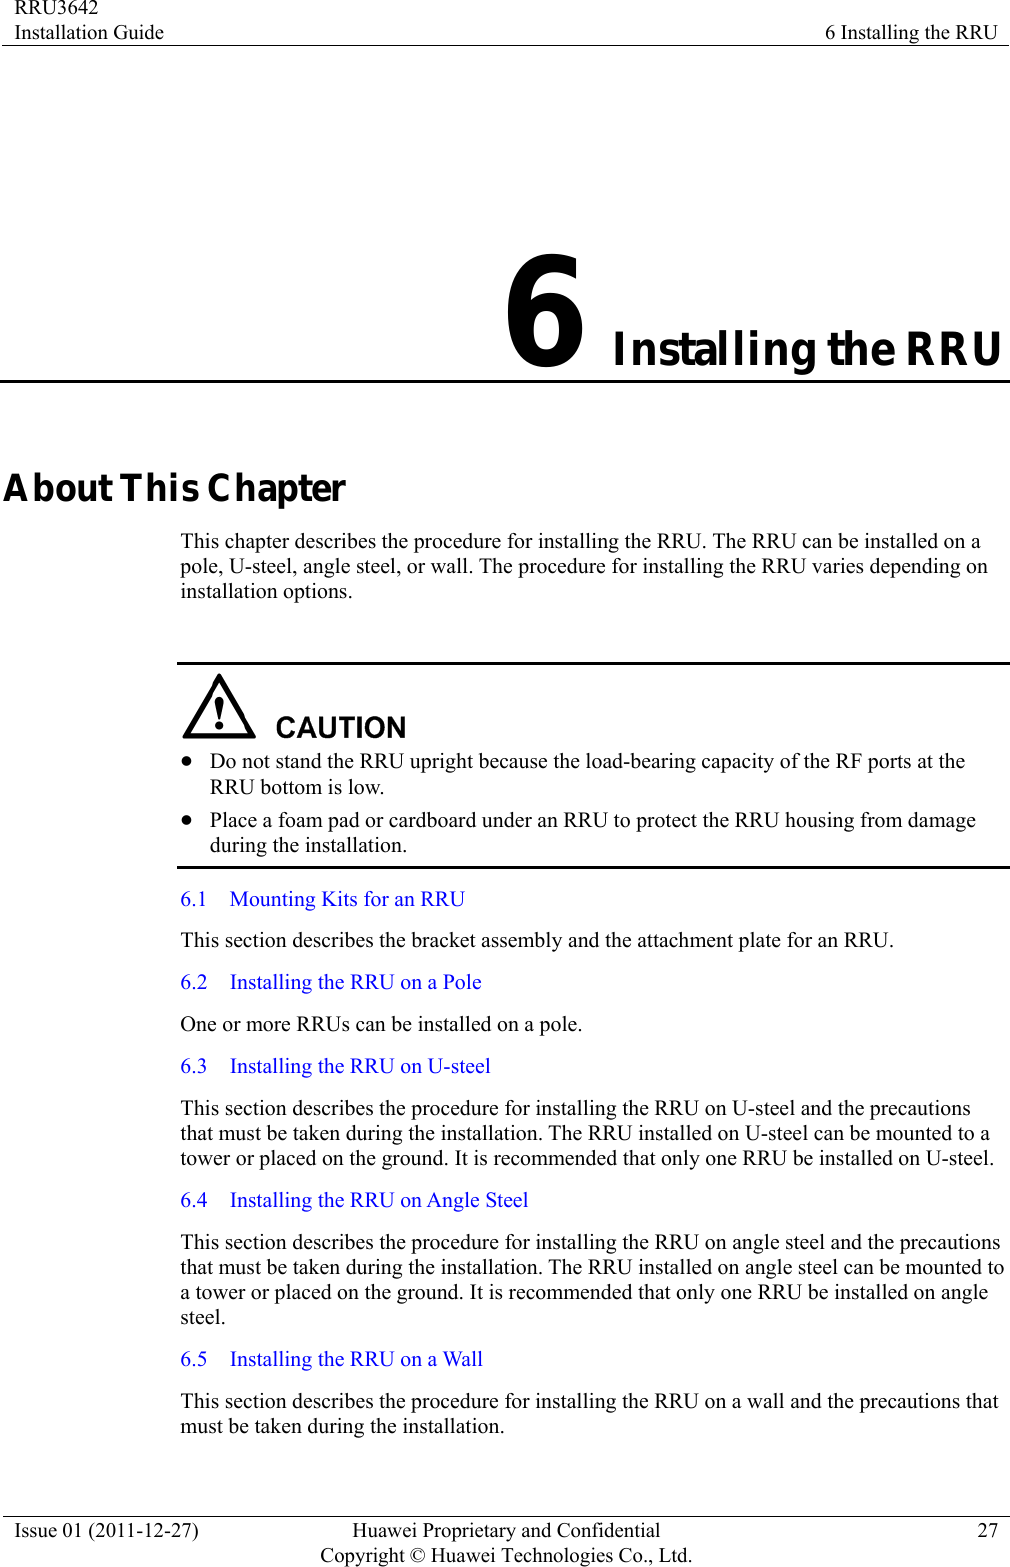 RRU3642 Installation Guide  6 Installing the RRU Issue 01 (2011-12-27)  Huawei Proprietary and Confidential         Copyright © Huawei Technologies Co., Ltd.27 6 Installing the RRU About This Chapter This chapter describes the procedure for installing the RRU. The RRU can be installed on a pole, U-steel, angle steel, or wall. The procedure for installing the RRU varies depending on installation options.   z Do not stand the RRU upright because the load-bearing capacity of the RF ports at the RRU bottom is low. z Place a foam pad or cardboard under an RRU to protect the RRU housing from damage during the installation. 6.1    Mounting Kits for an RRU This section describes the bracket assembly and the attachment plate for an RRU. 6.2    Installing the RRU on a Pole One or more RRUs can be installed on a pole. 6.3  Installing the RRU on U-steel This section describes the procedure for installing the RRU on U-steel and the precautions that must be taken during the installation. The RRU installed on U-steel can be mounted to a tower or placed on the ground. It is recommended that only one RRU be installed on U-steel. 6.4    Installing the RRU on Angle Steel This section describes the procedure for installing the RRU on angle steel and the precautions that must be taken during the installation. The RRU installed on angle steel can be mounted to a tower or placed on the ground. It is recommended that only one RRU be installed on angle steel. 6.5  Installing the RRU on a Wall This section describes the procedure for installing the RRU on a wall and the precautions that must be taken during the installation. 